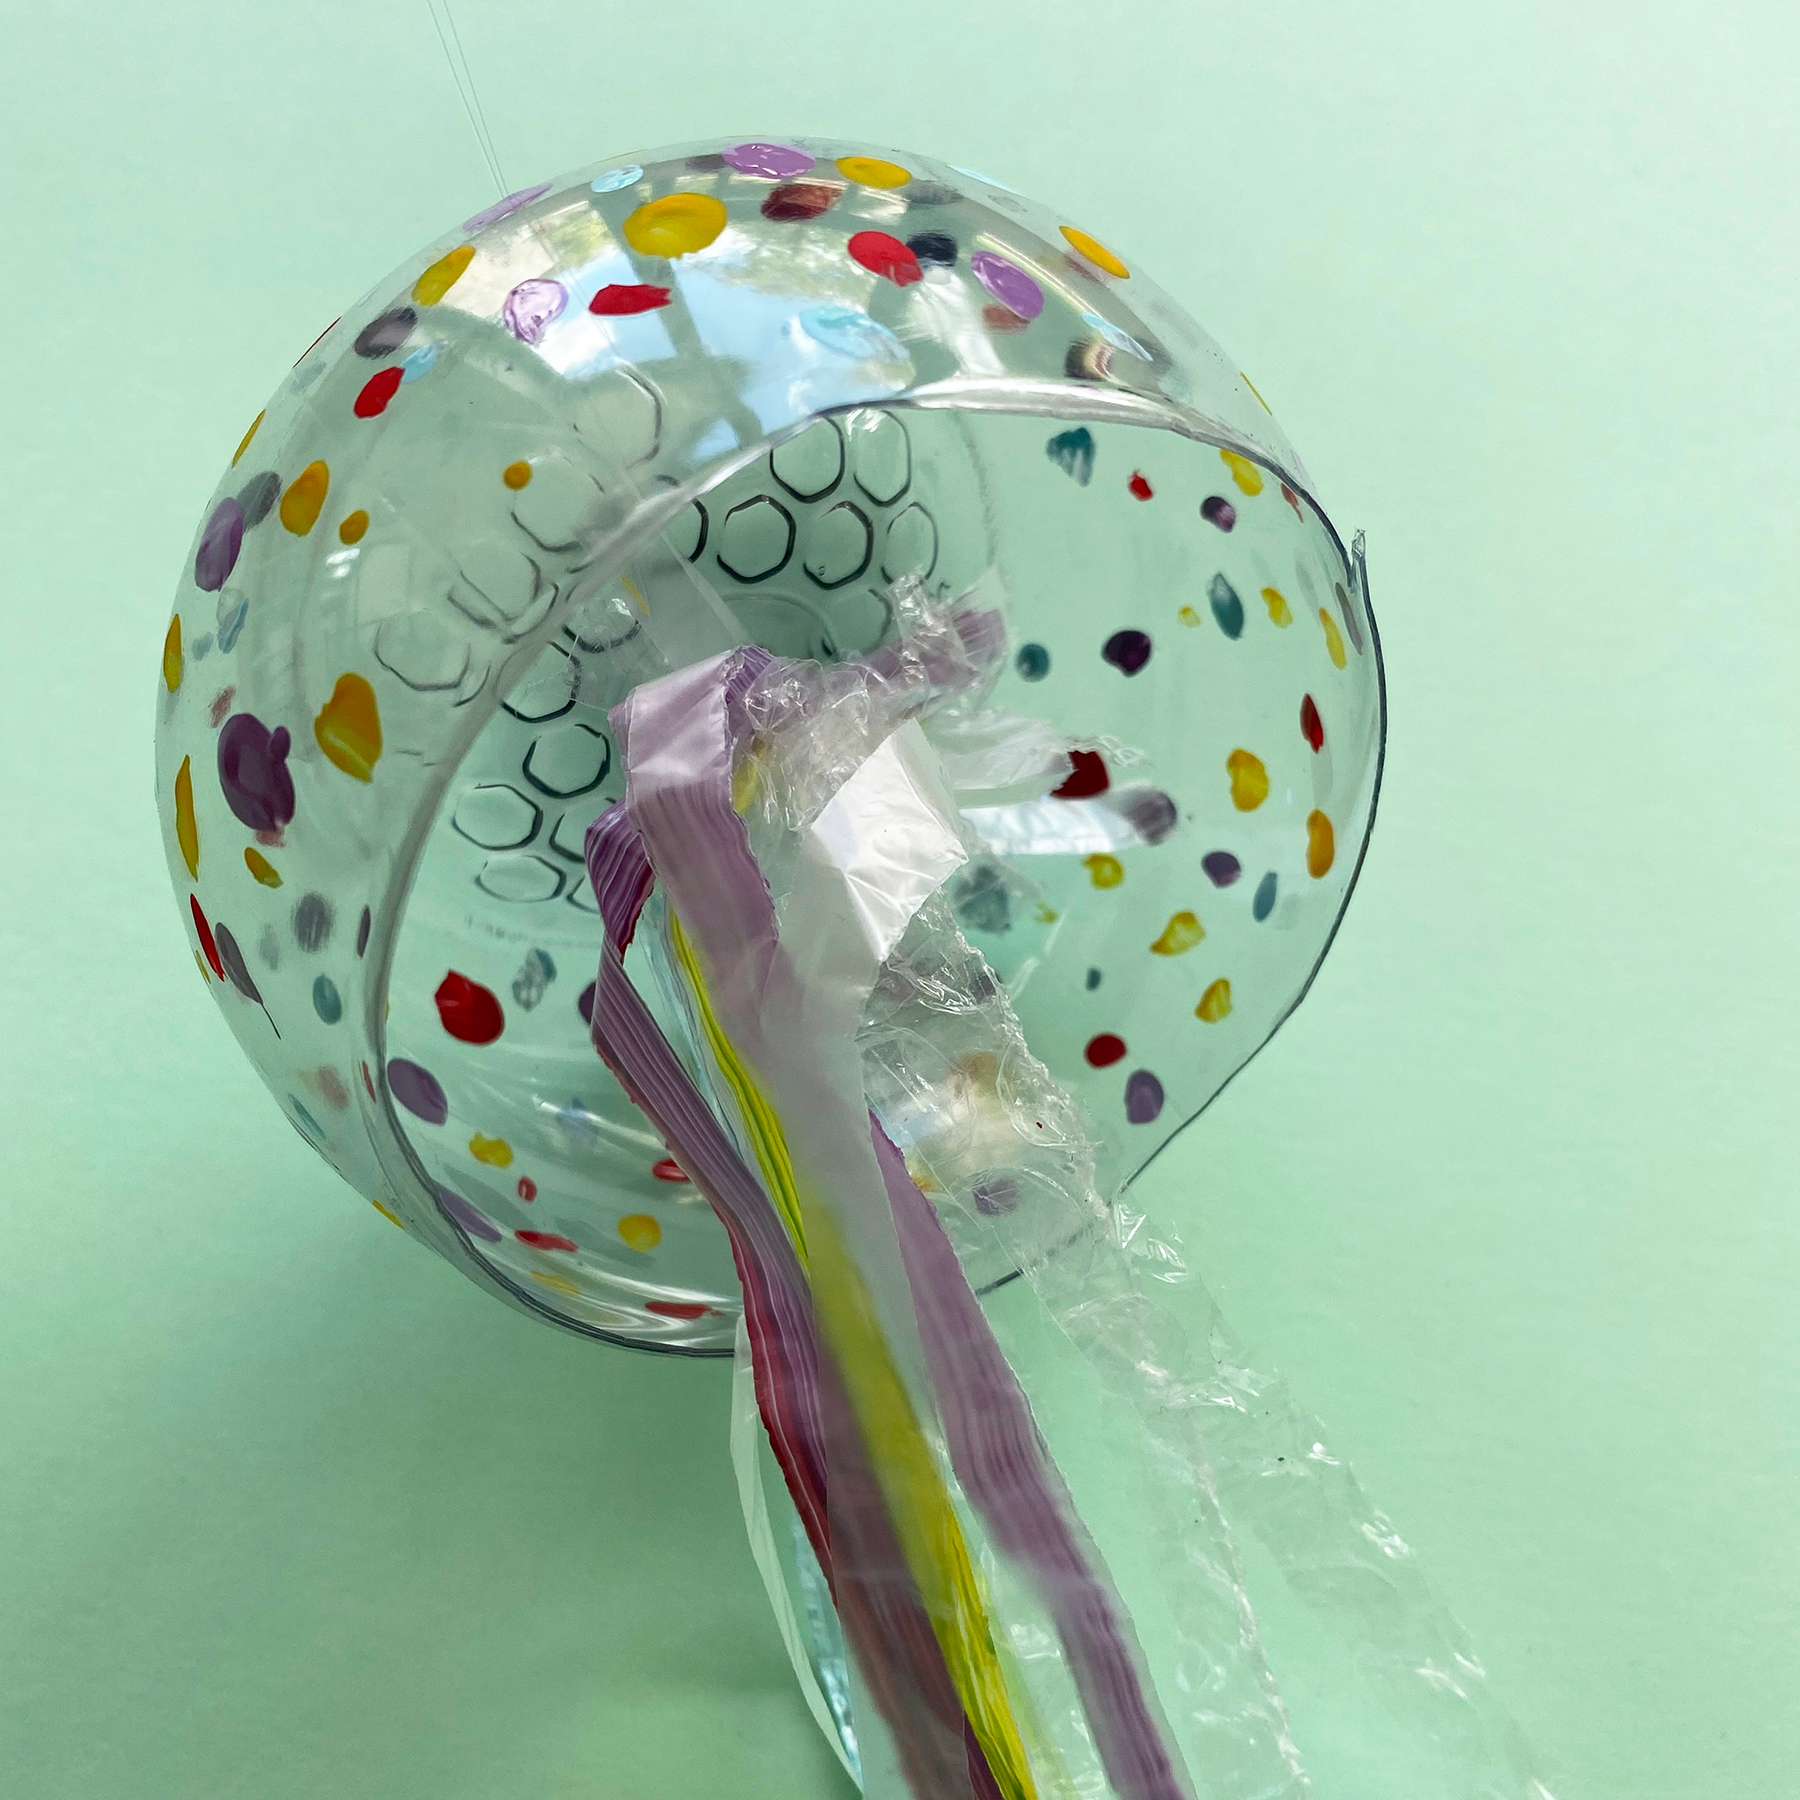 A photo of the plastic bag, cellophane and bubble wrap strips being tied inside the plastic bottle bottom with clear string on a mint green background